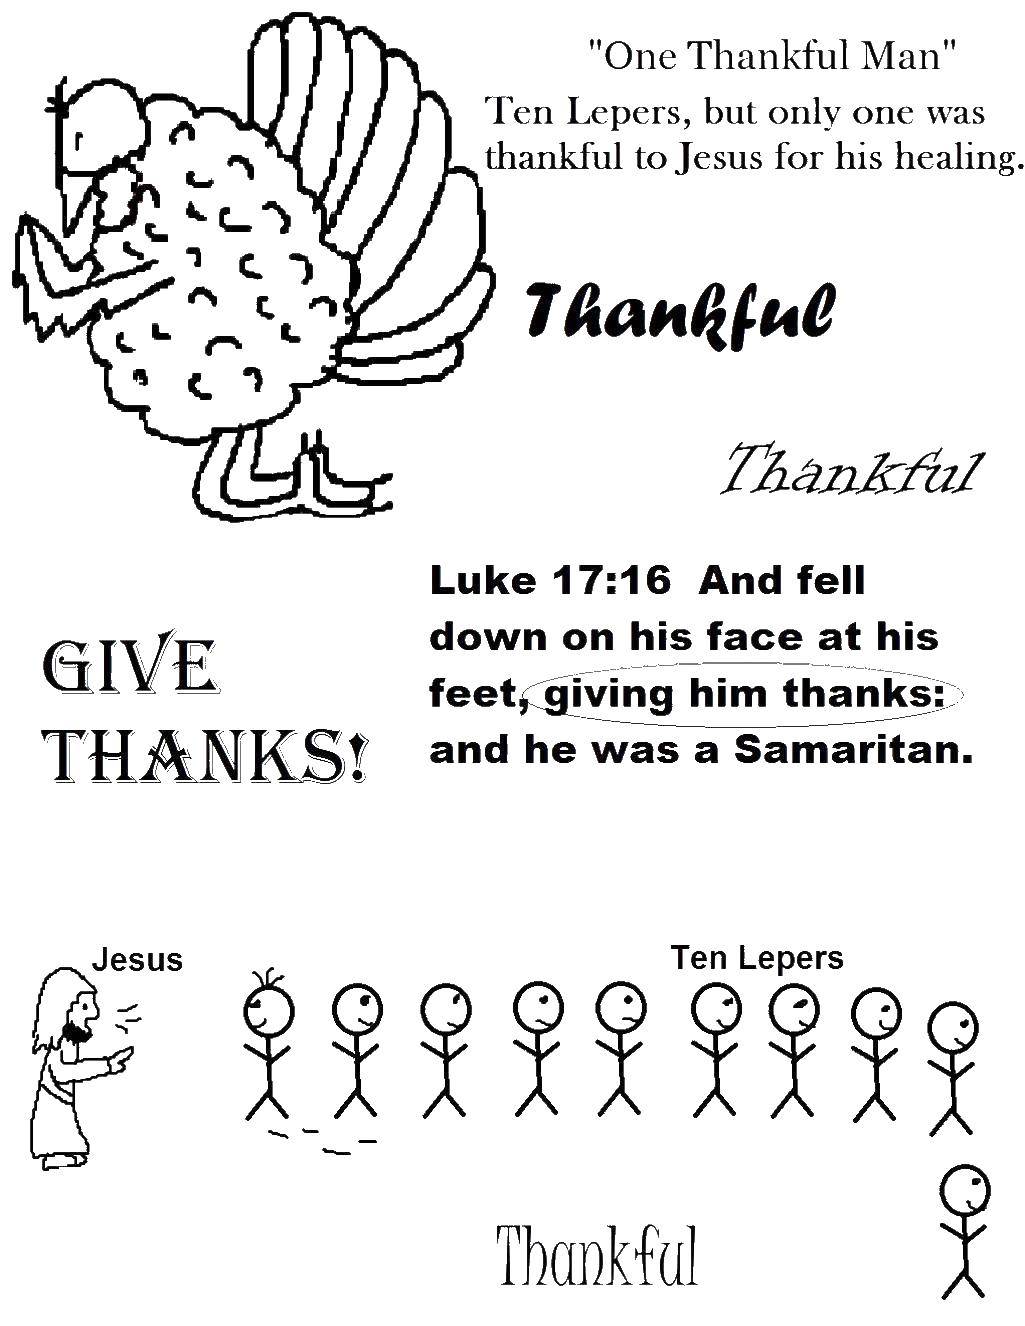 Coloring Turkey prays. Category the Bible. Tags:  Jesus, the Bible.